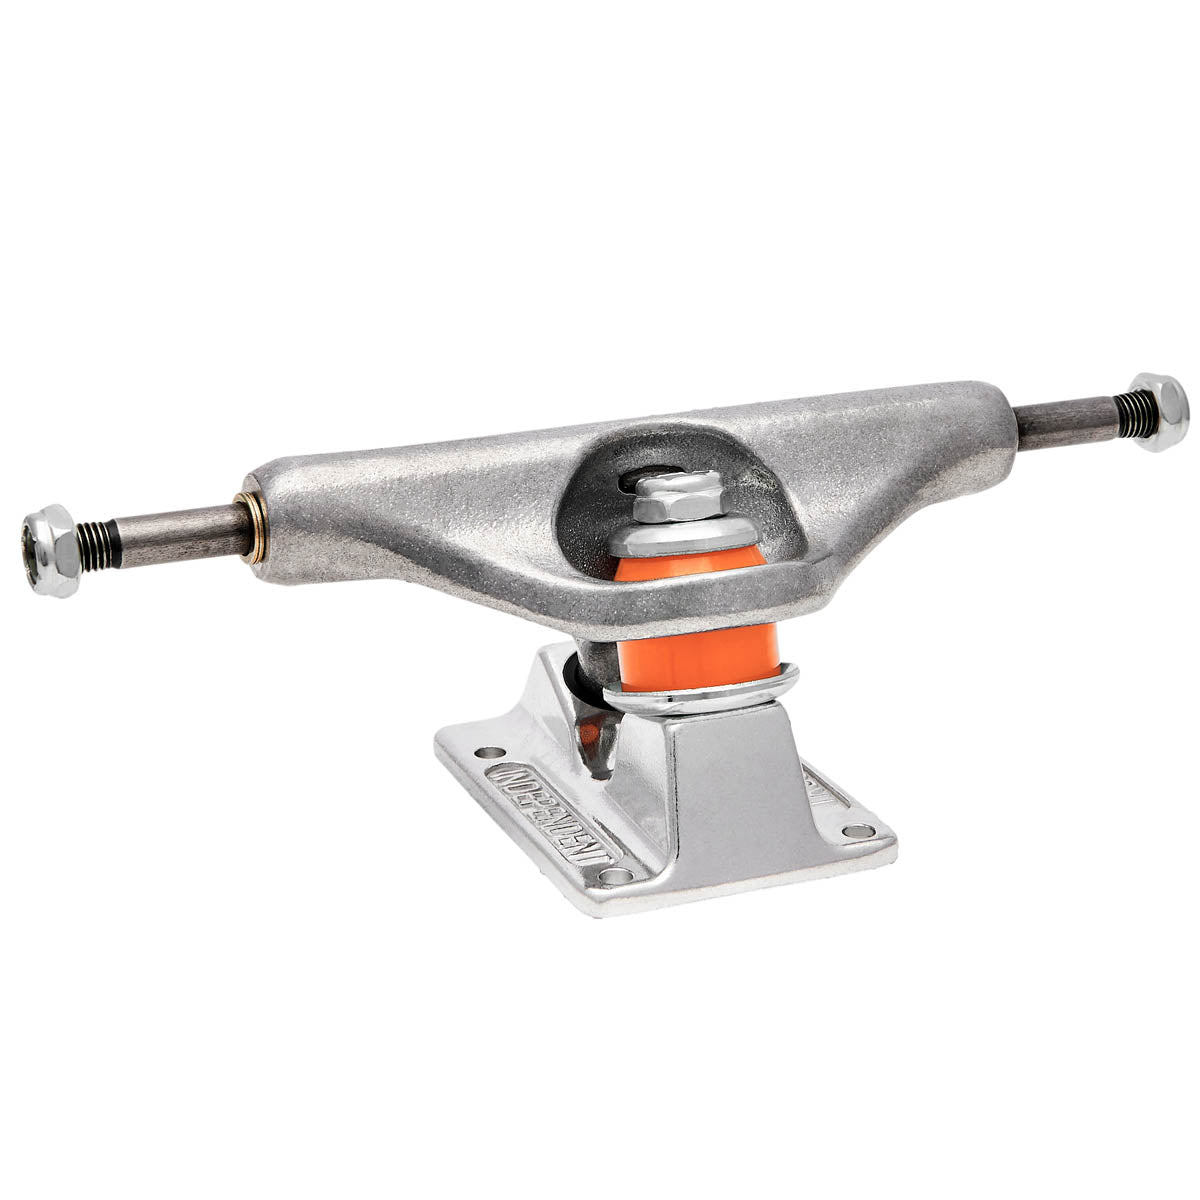 Independent Stage 11 Forged Hollow Skateboard Trucks - Silver image 2